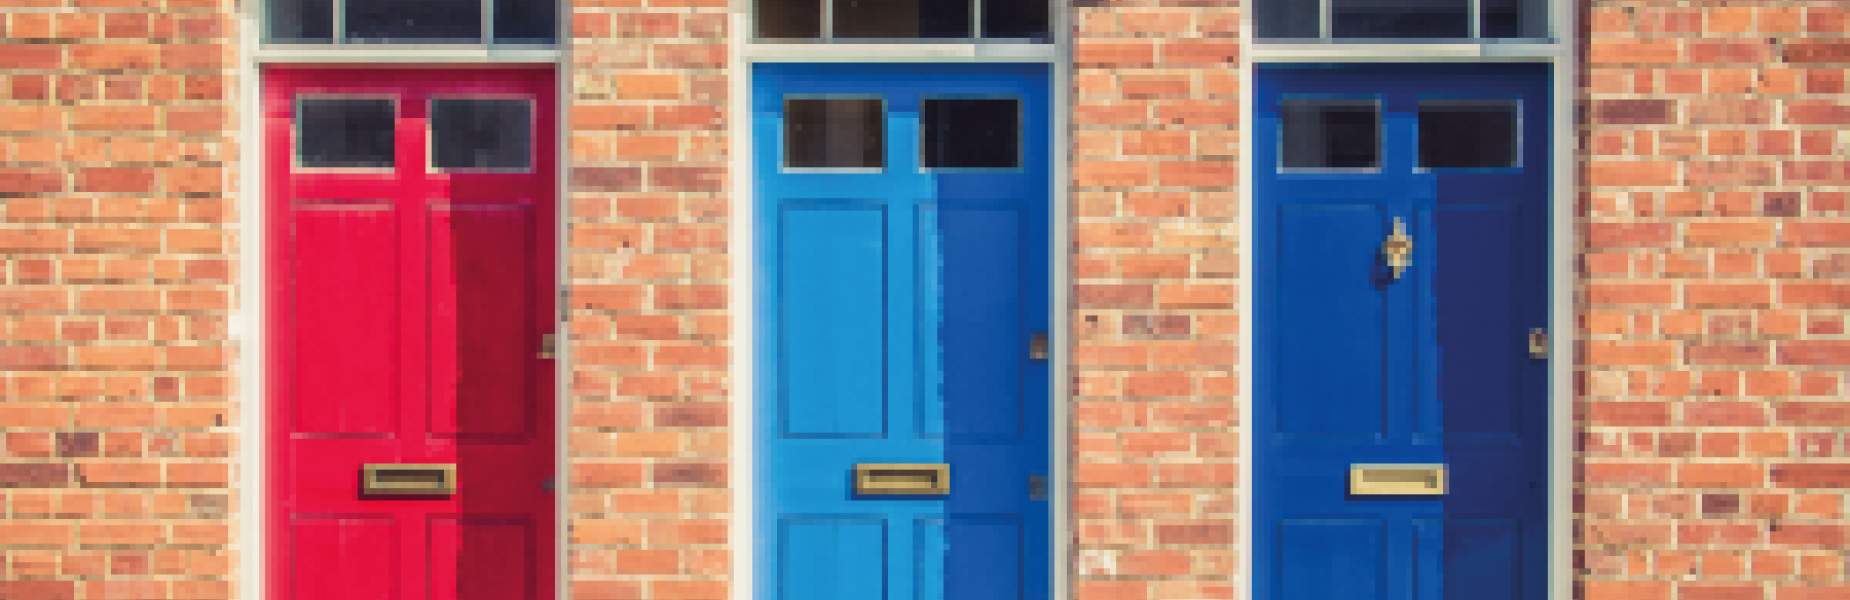 Three house doors in red, light blue and dark blue colours